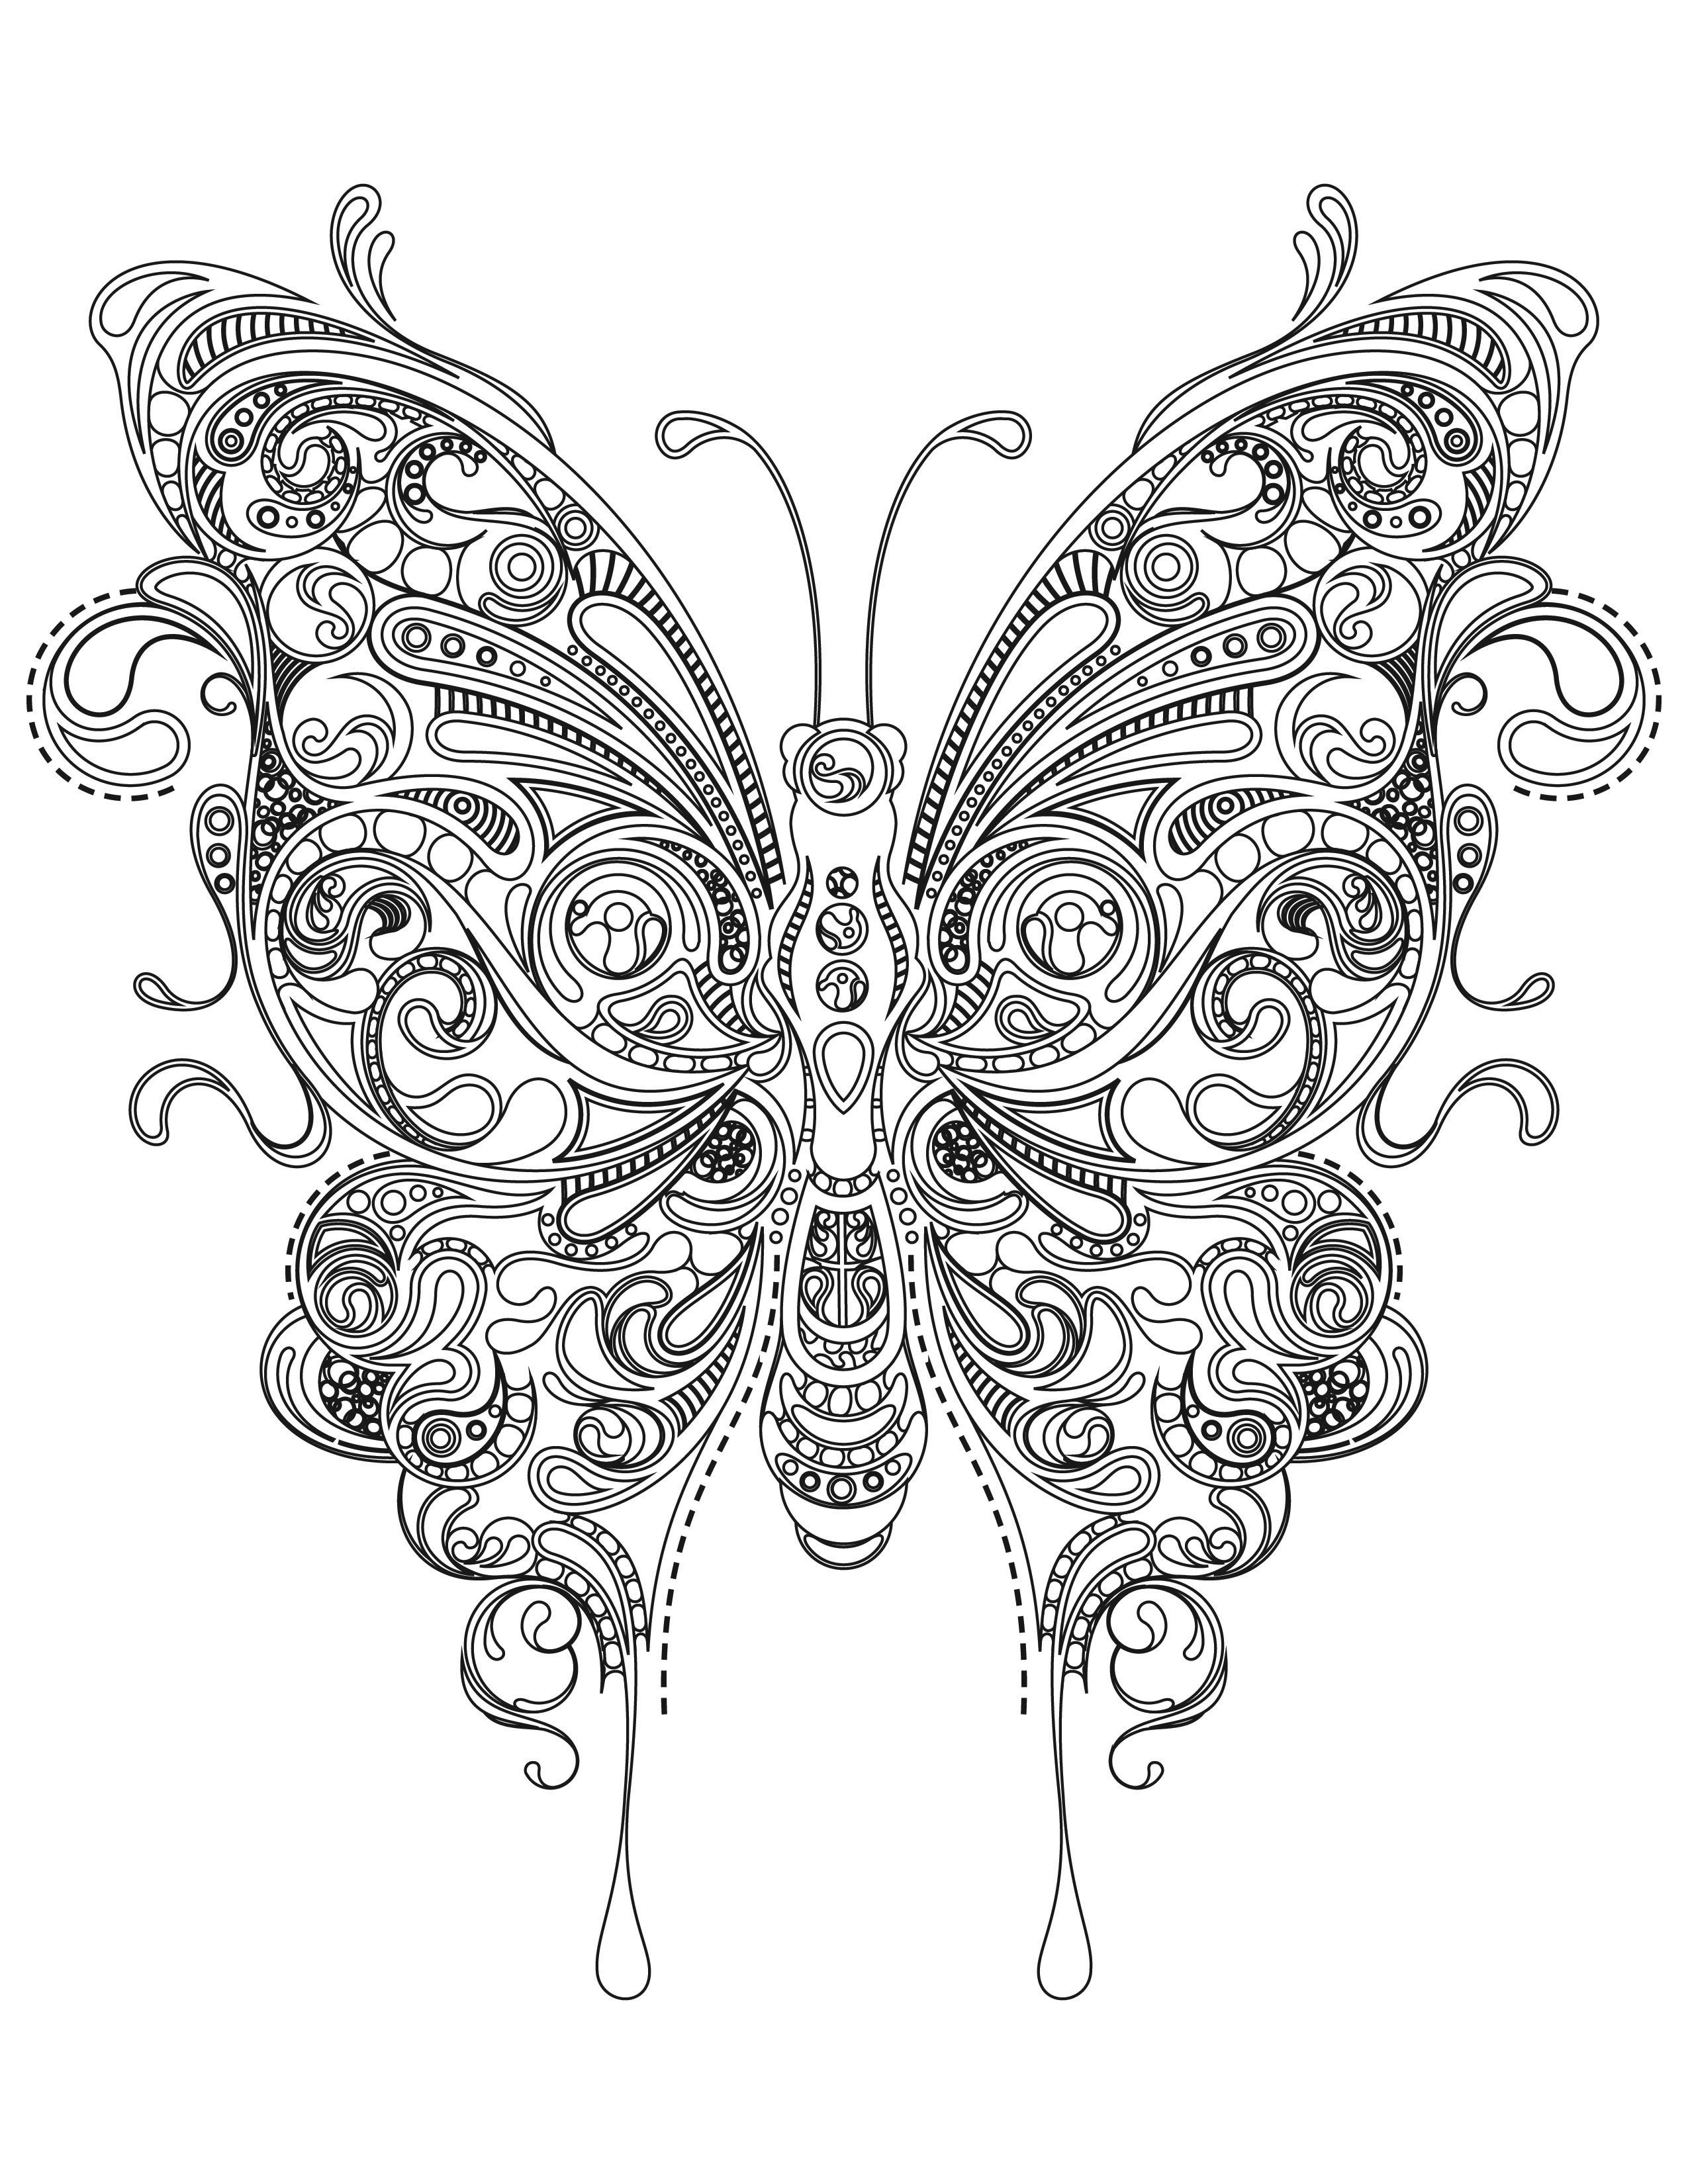 Download Butterfly Coloring Pages for Adults - Best Coloring Pages For Kids